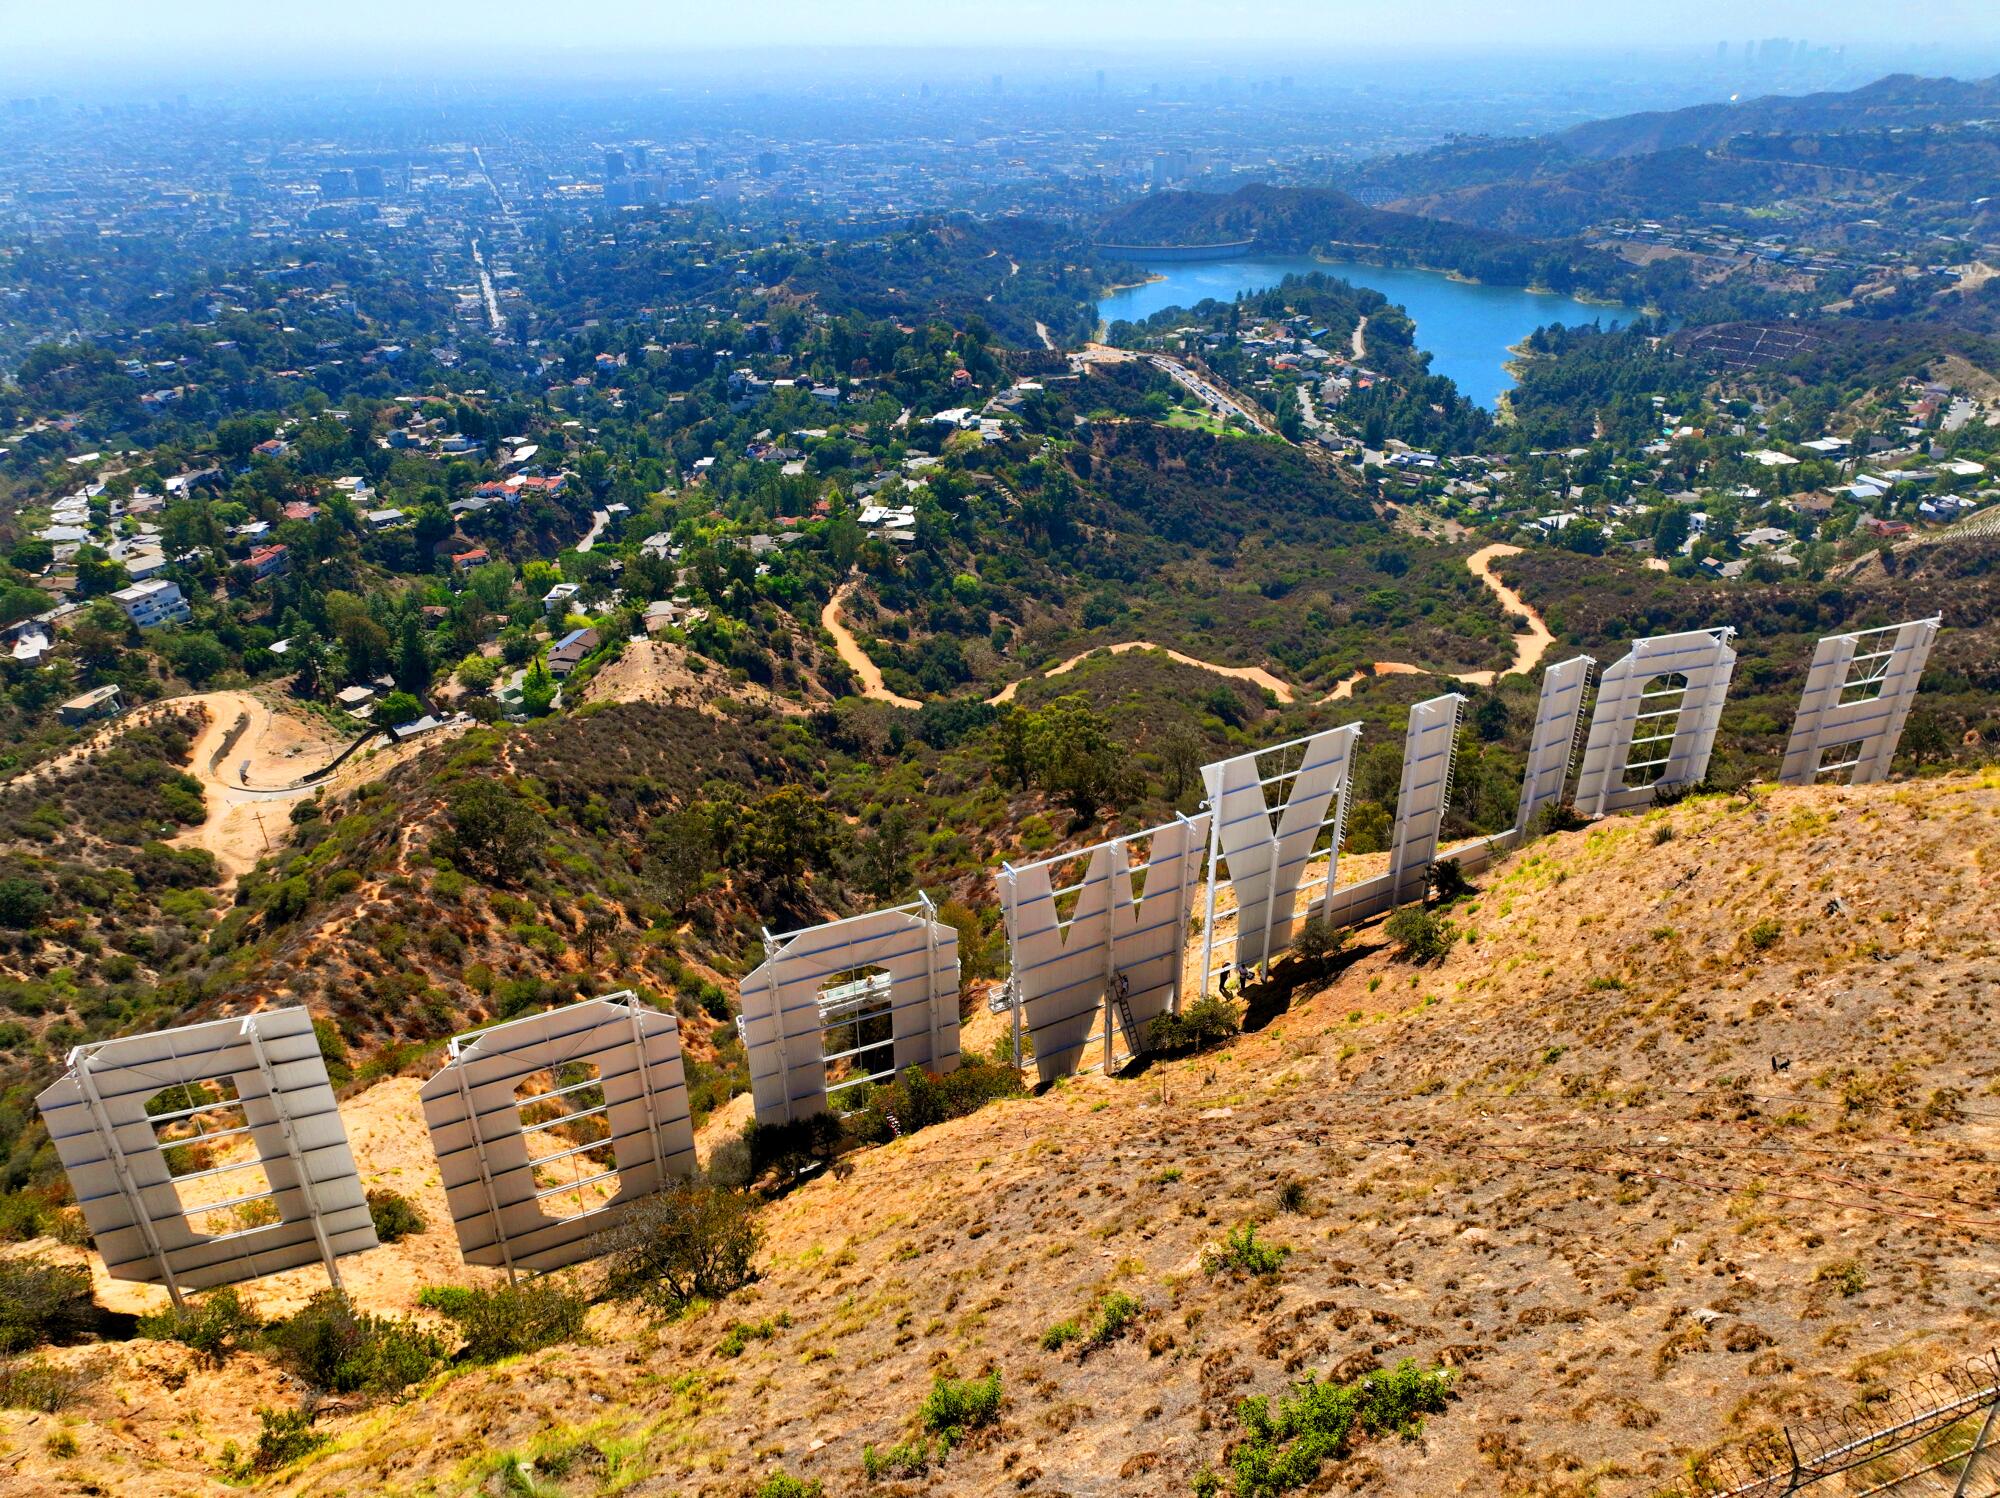 The Hollywood sign debuted 100 years ago in 1923, the year of